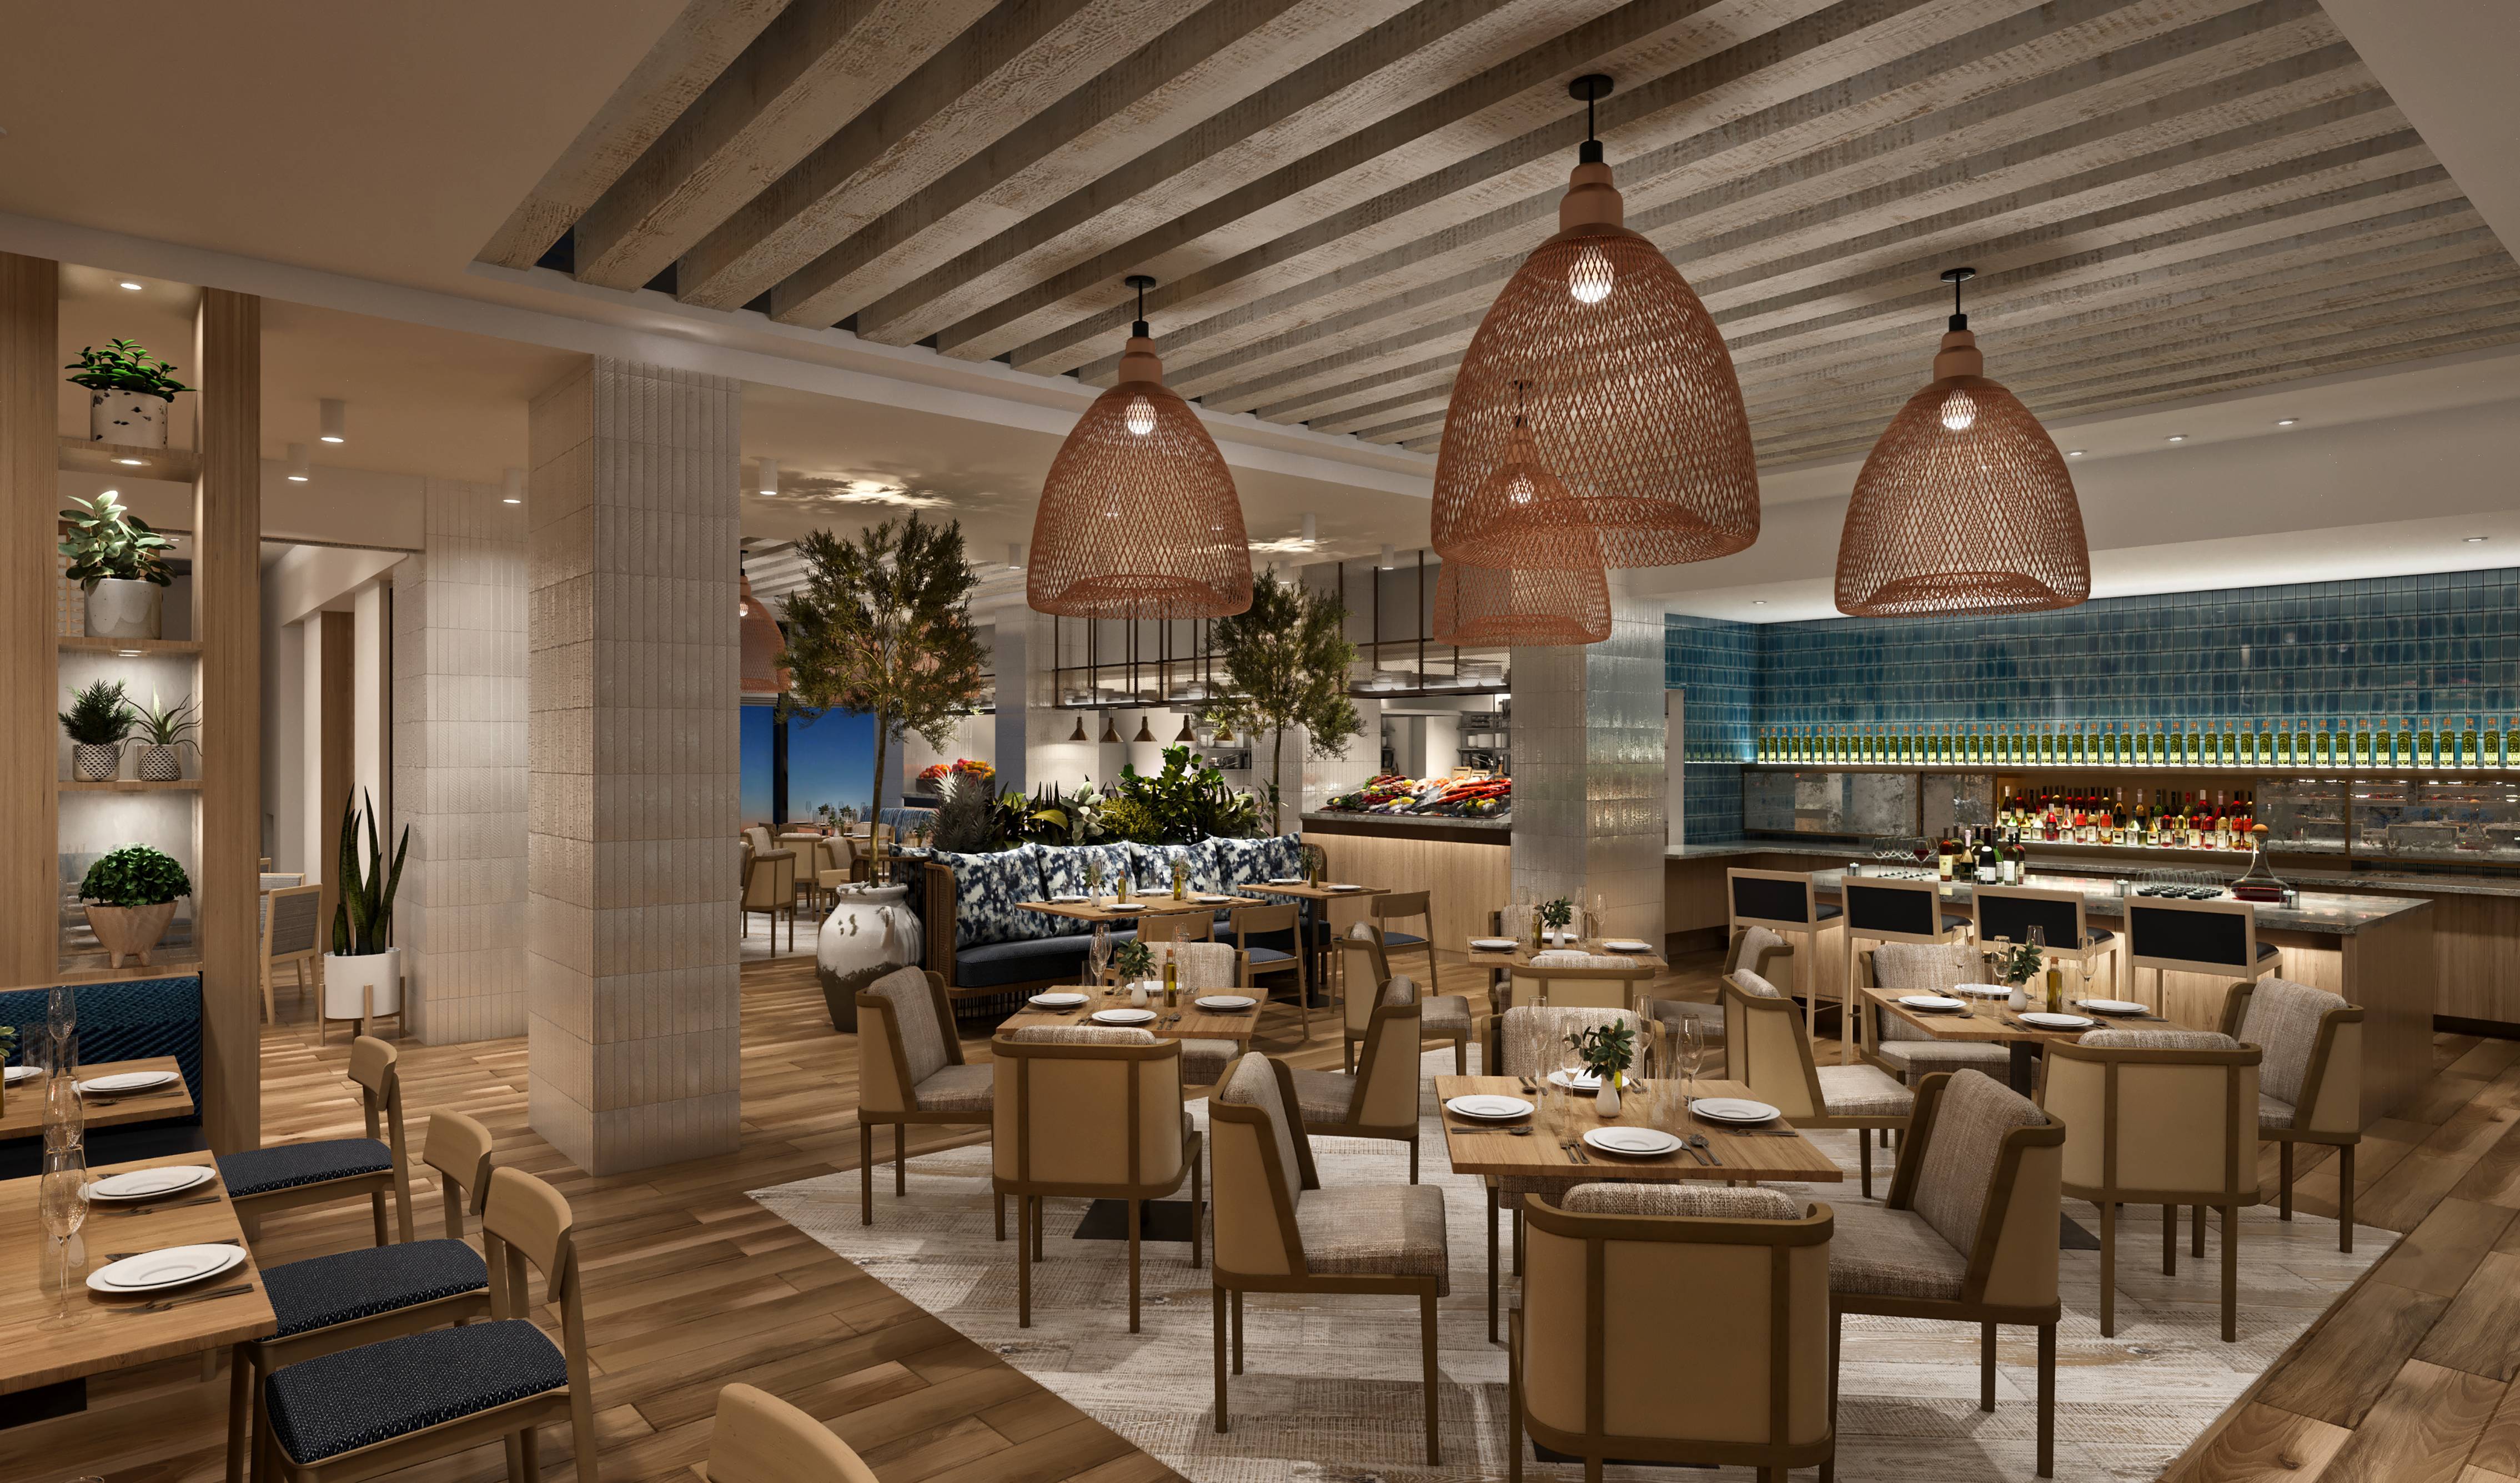 Four new restaurants to open at The Walt Disney World Reserve including the signature restaurant Amare